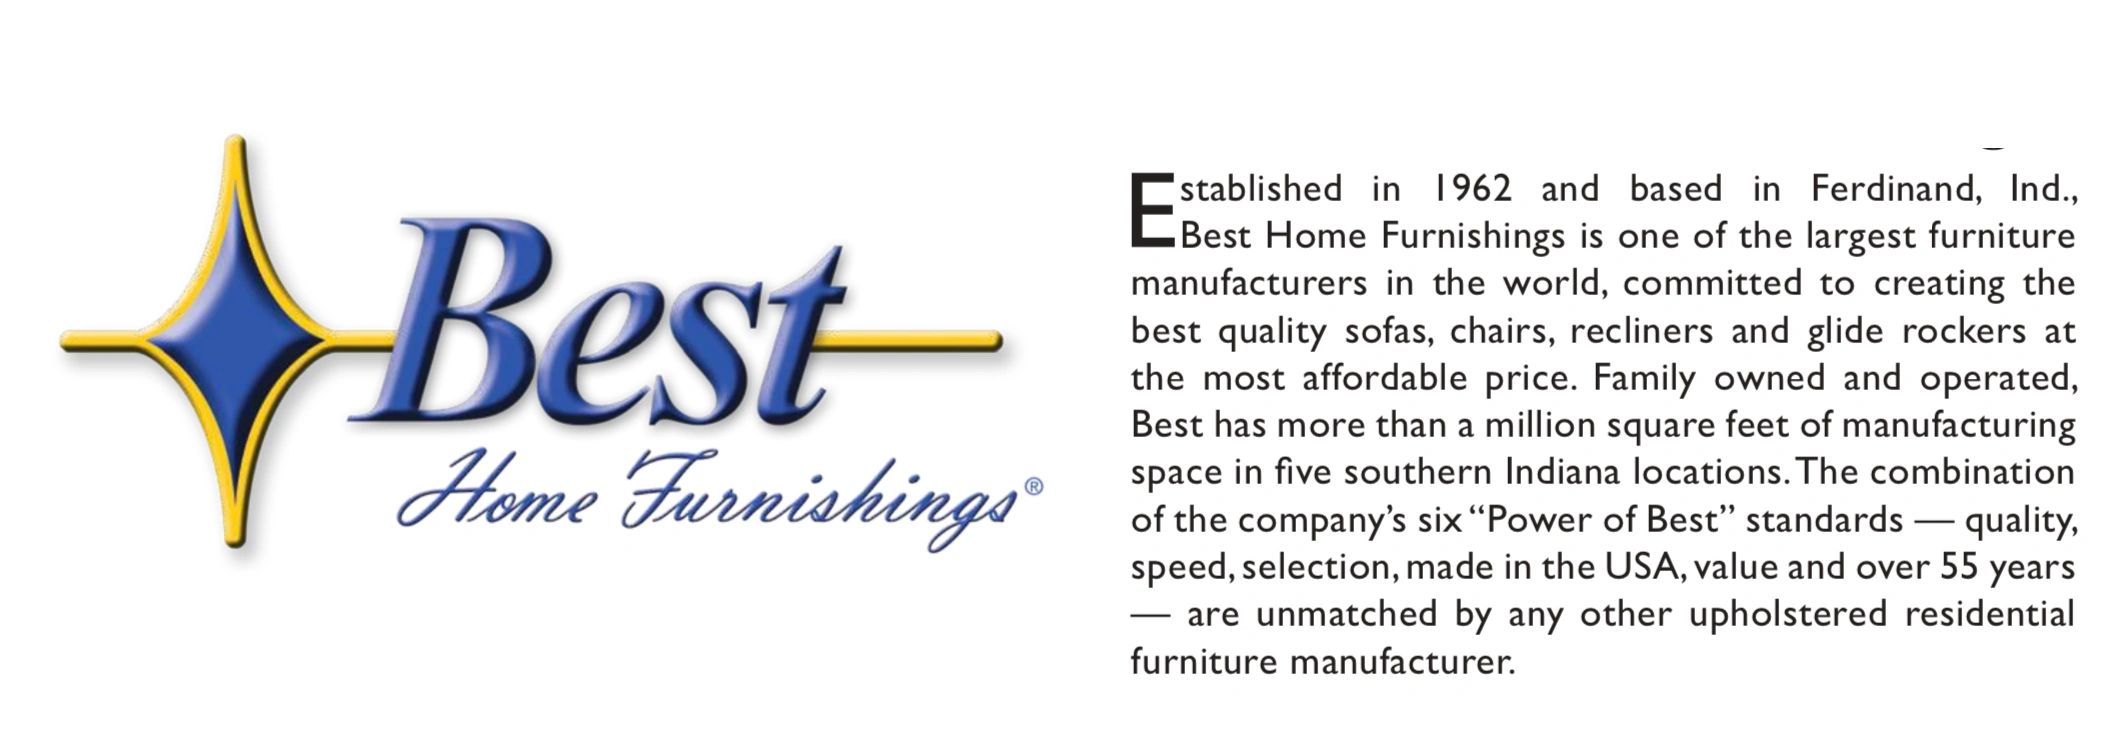 Best Home Furnishings bio made in usa established in 1962 sofas, recliners, big mans recliners 